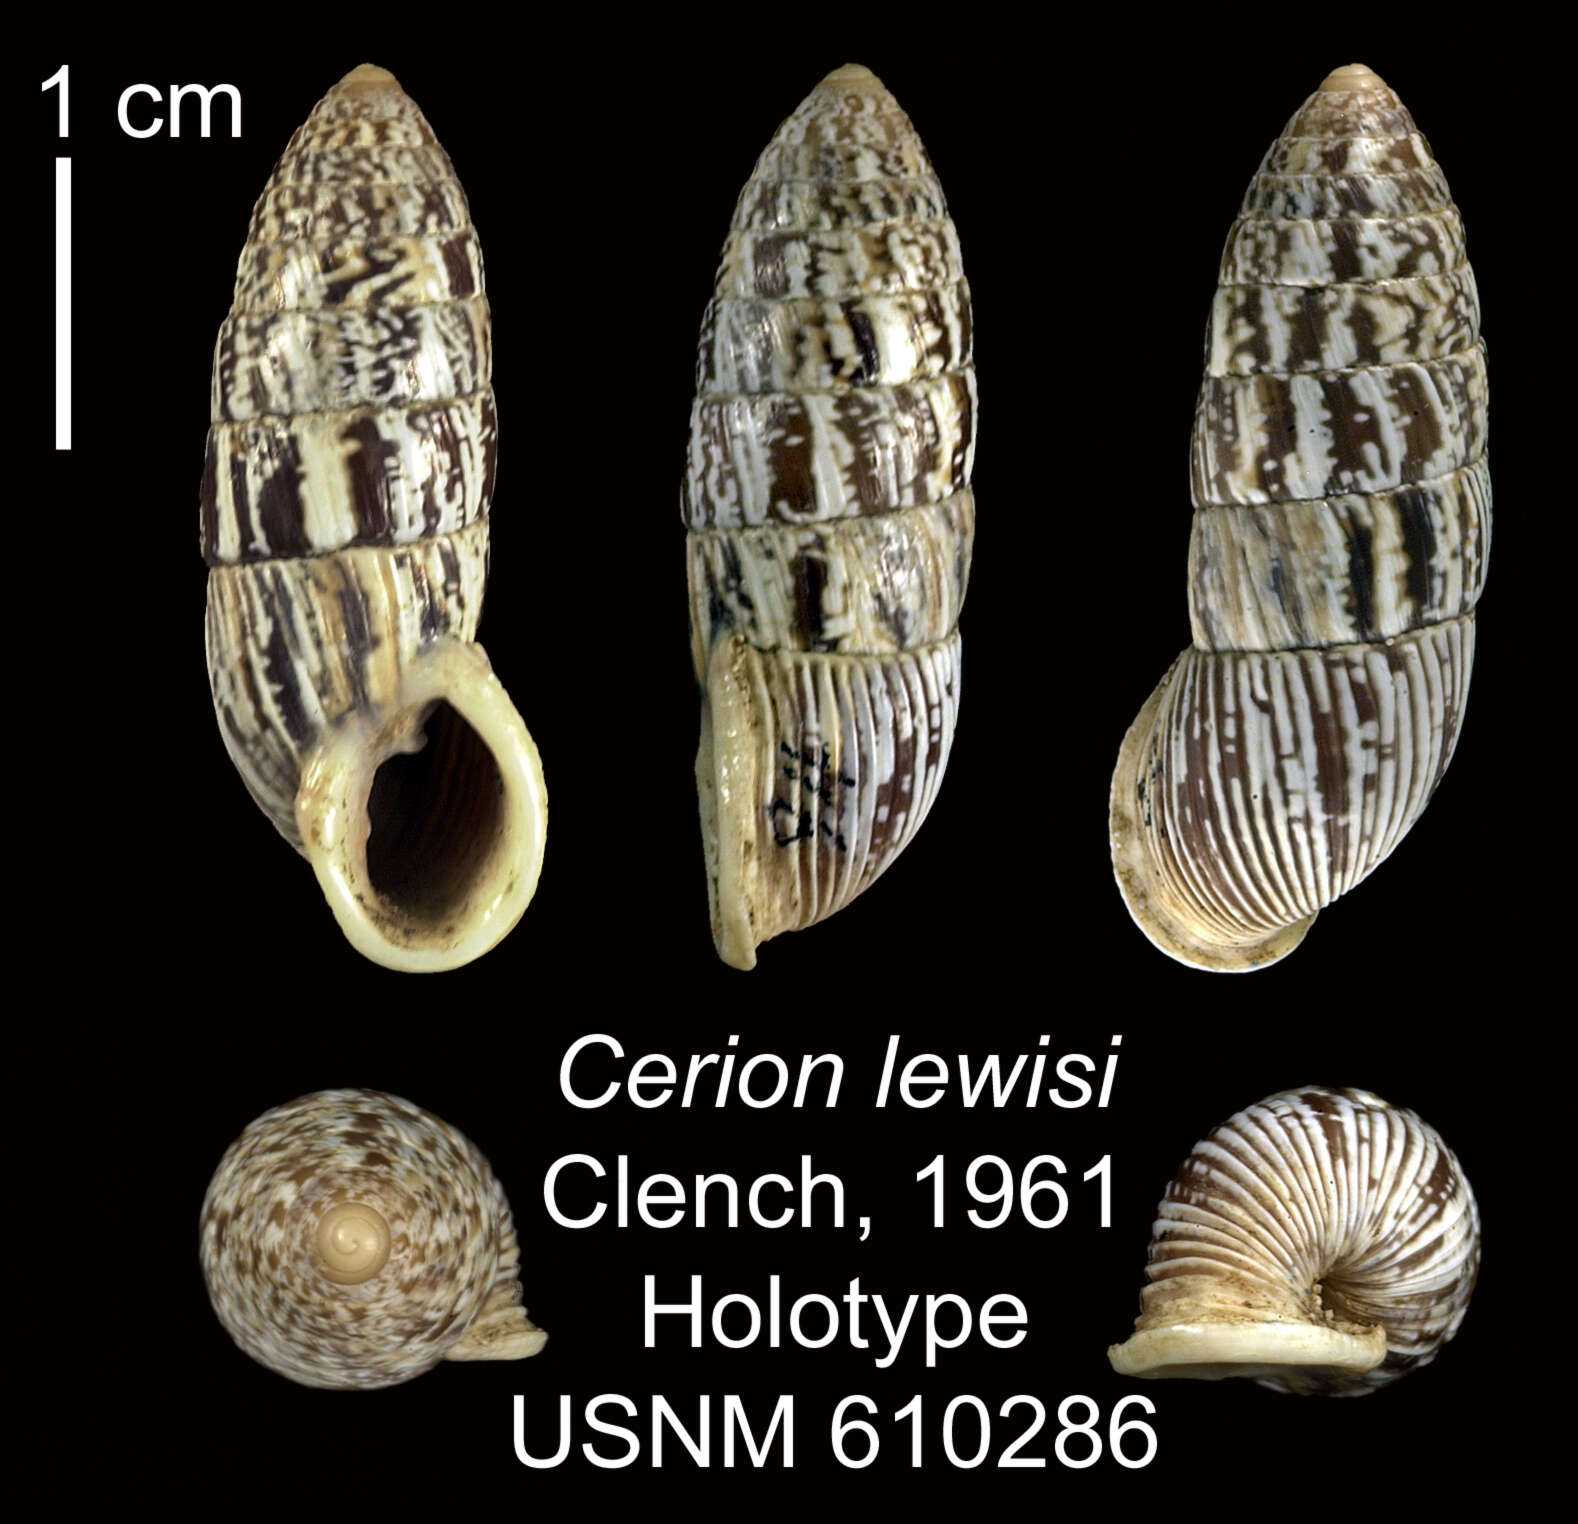 Image of Cerion lewisi Clench 1961